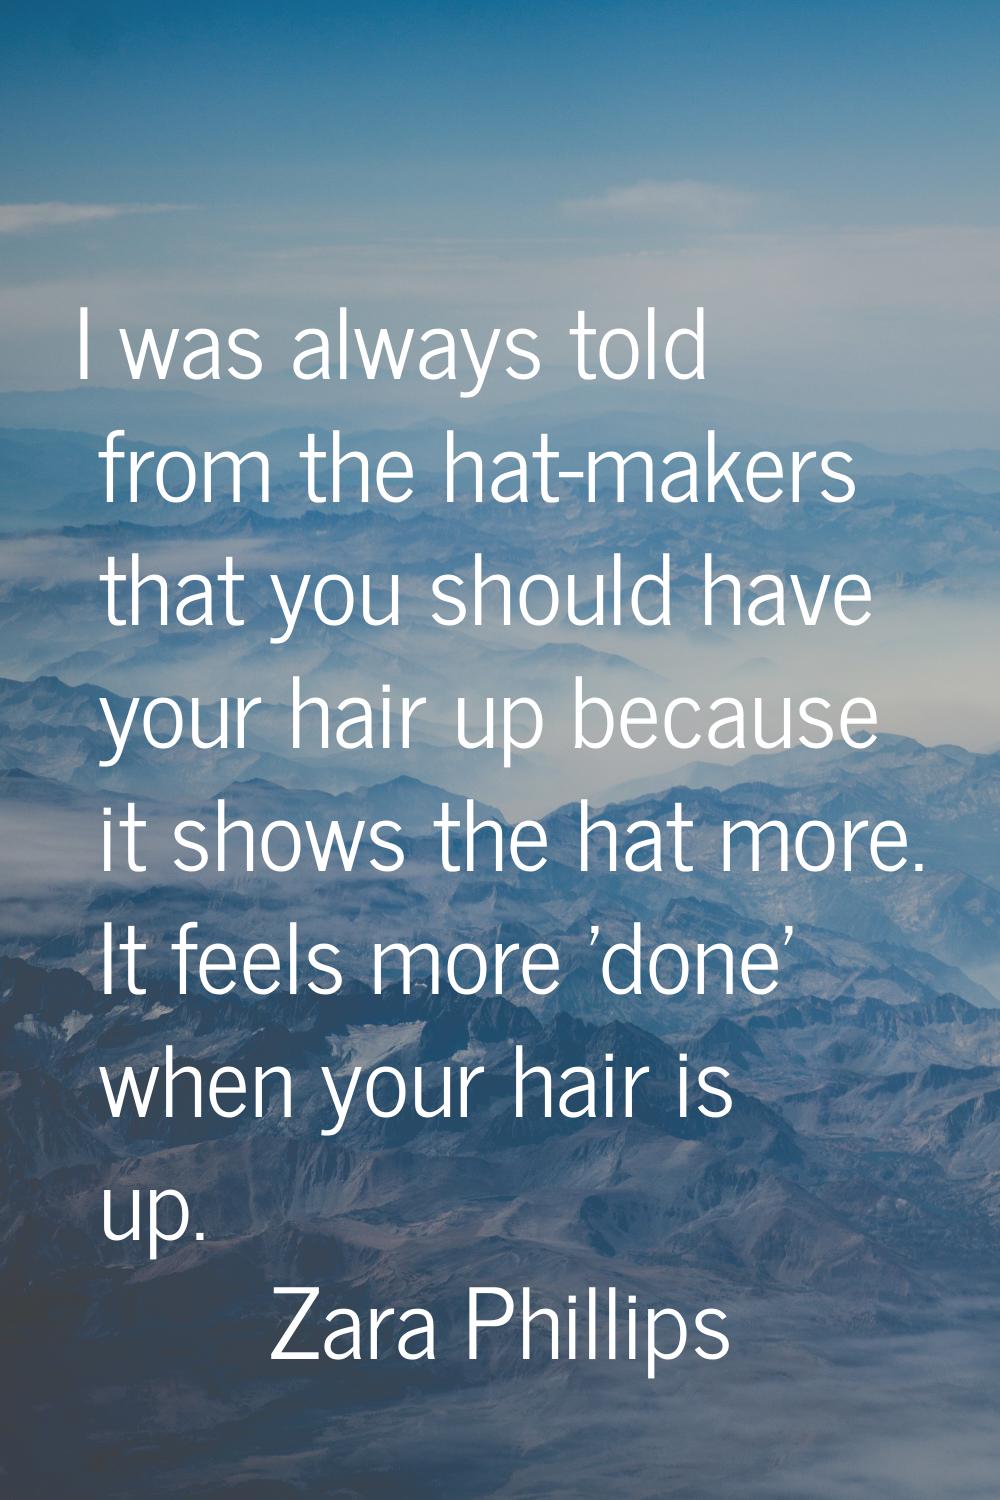 I was always told from the hat-makers that you should have your hair up because it shows the hat mo